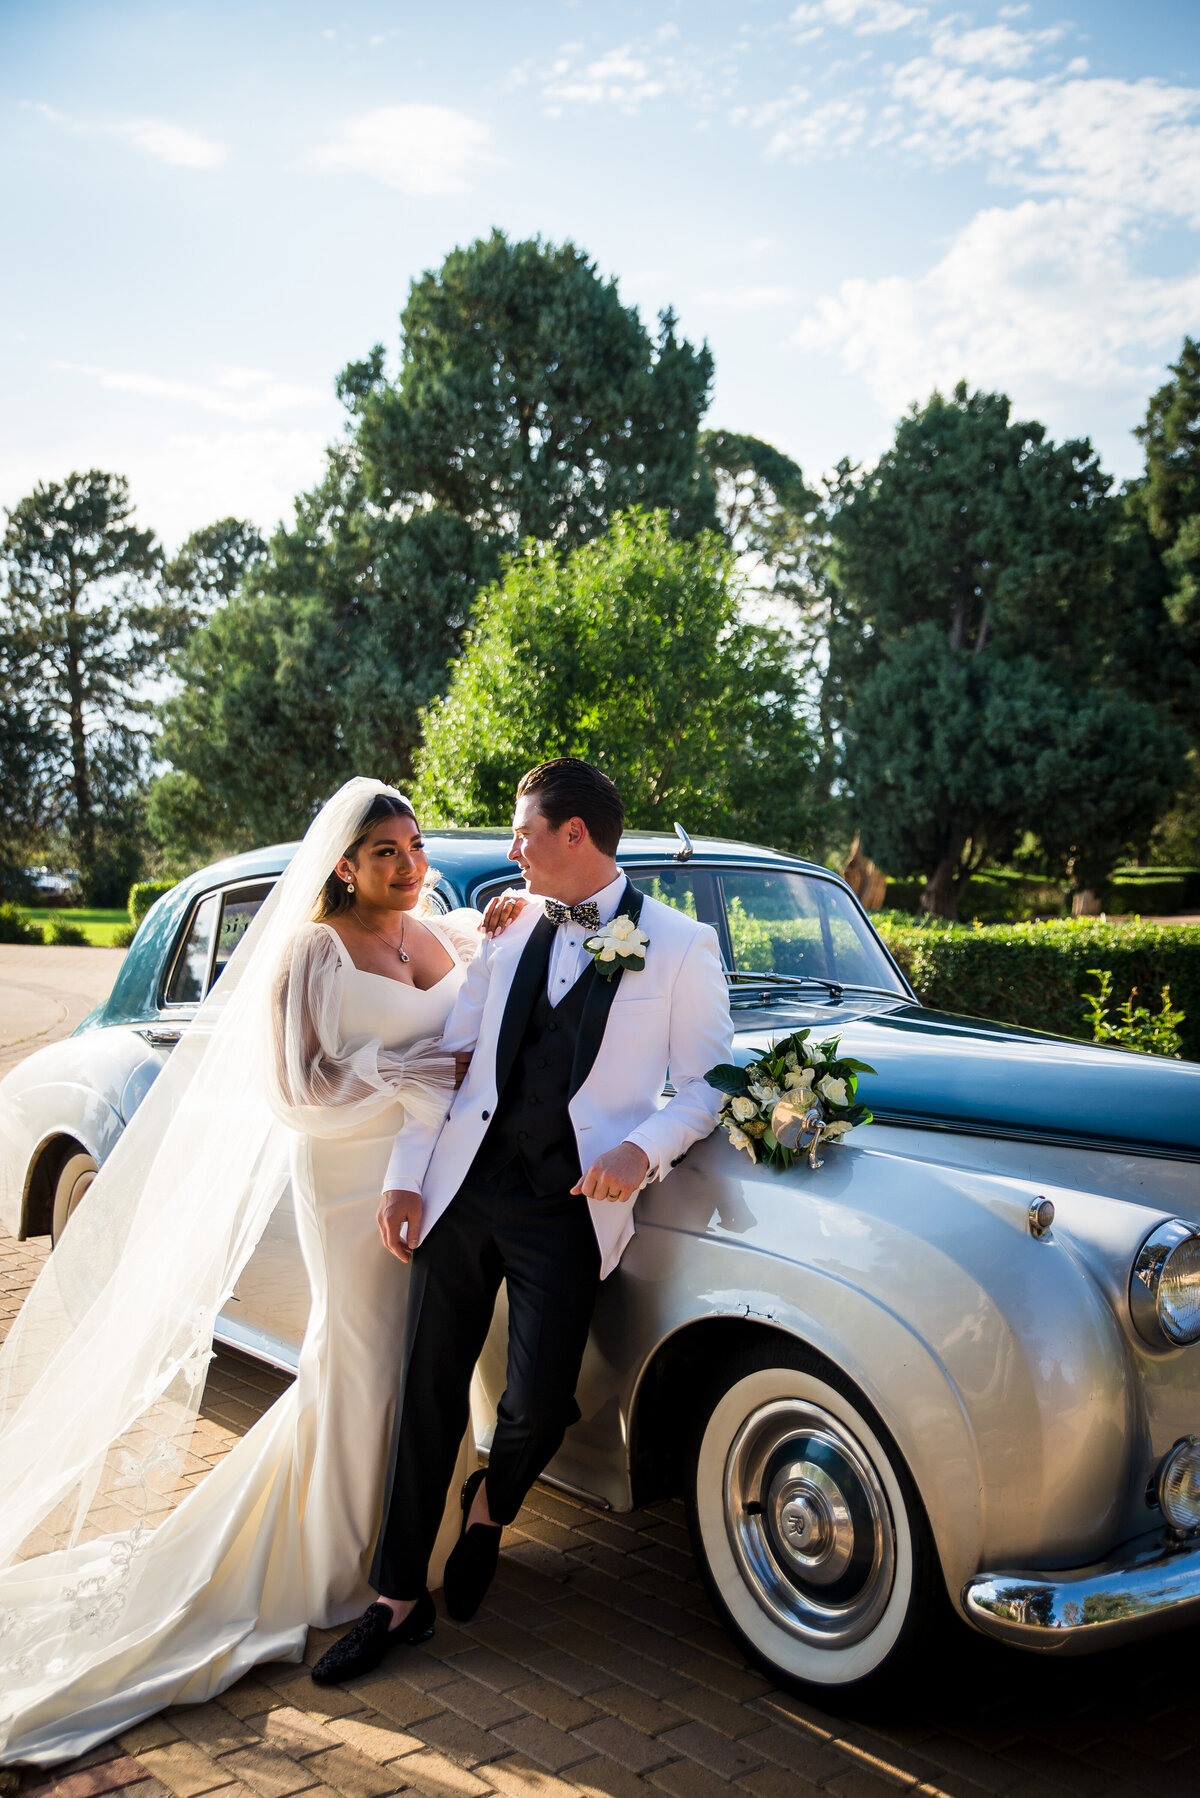 A groom leans on a silver vintage getaway car as his bride stands close, holding his arm.